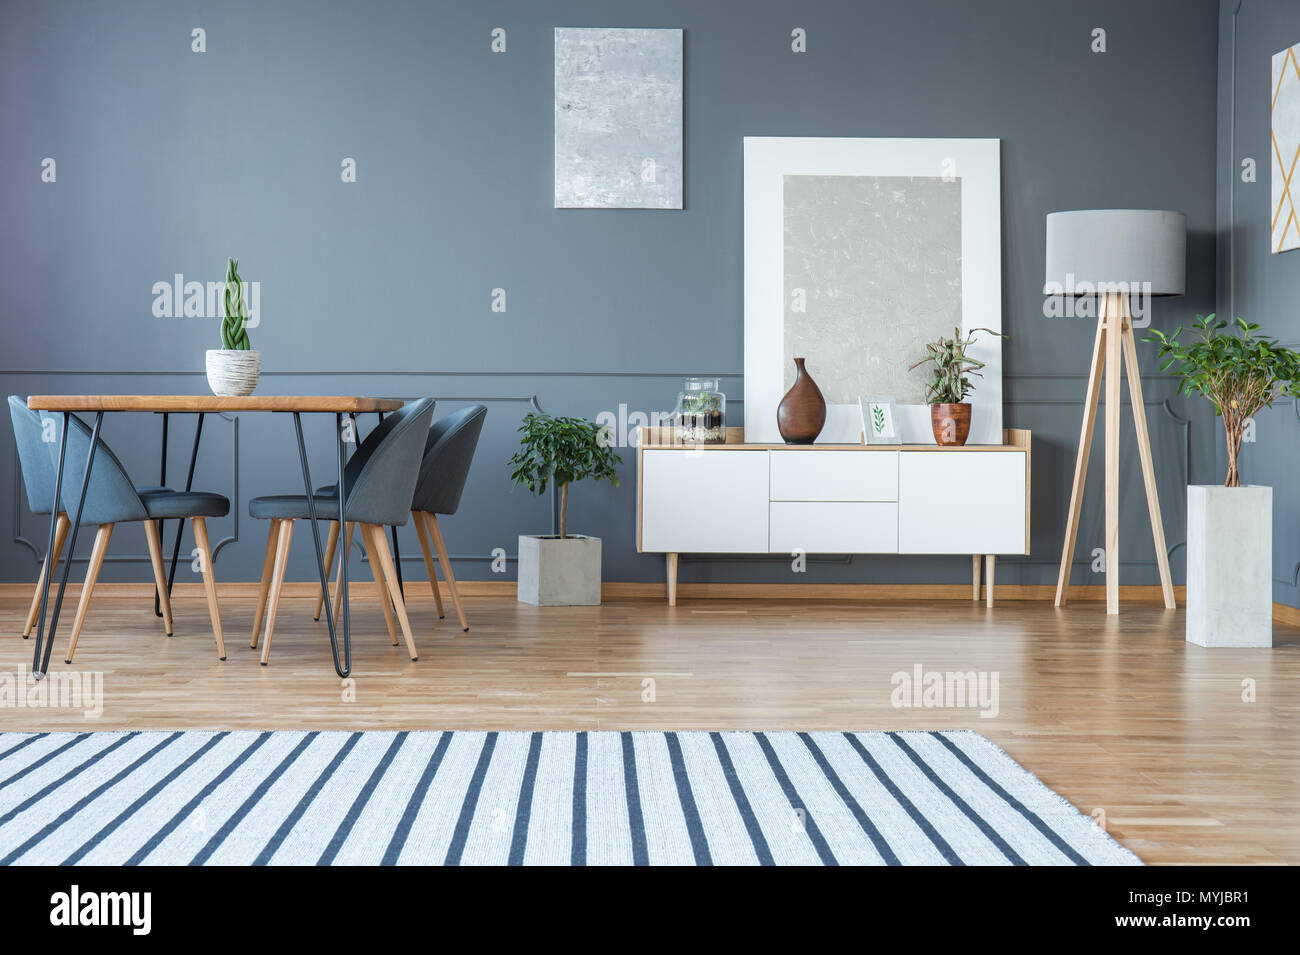 Modern dining room interior with a striped rug, table, grey chairs and white cabinet Stock Photo